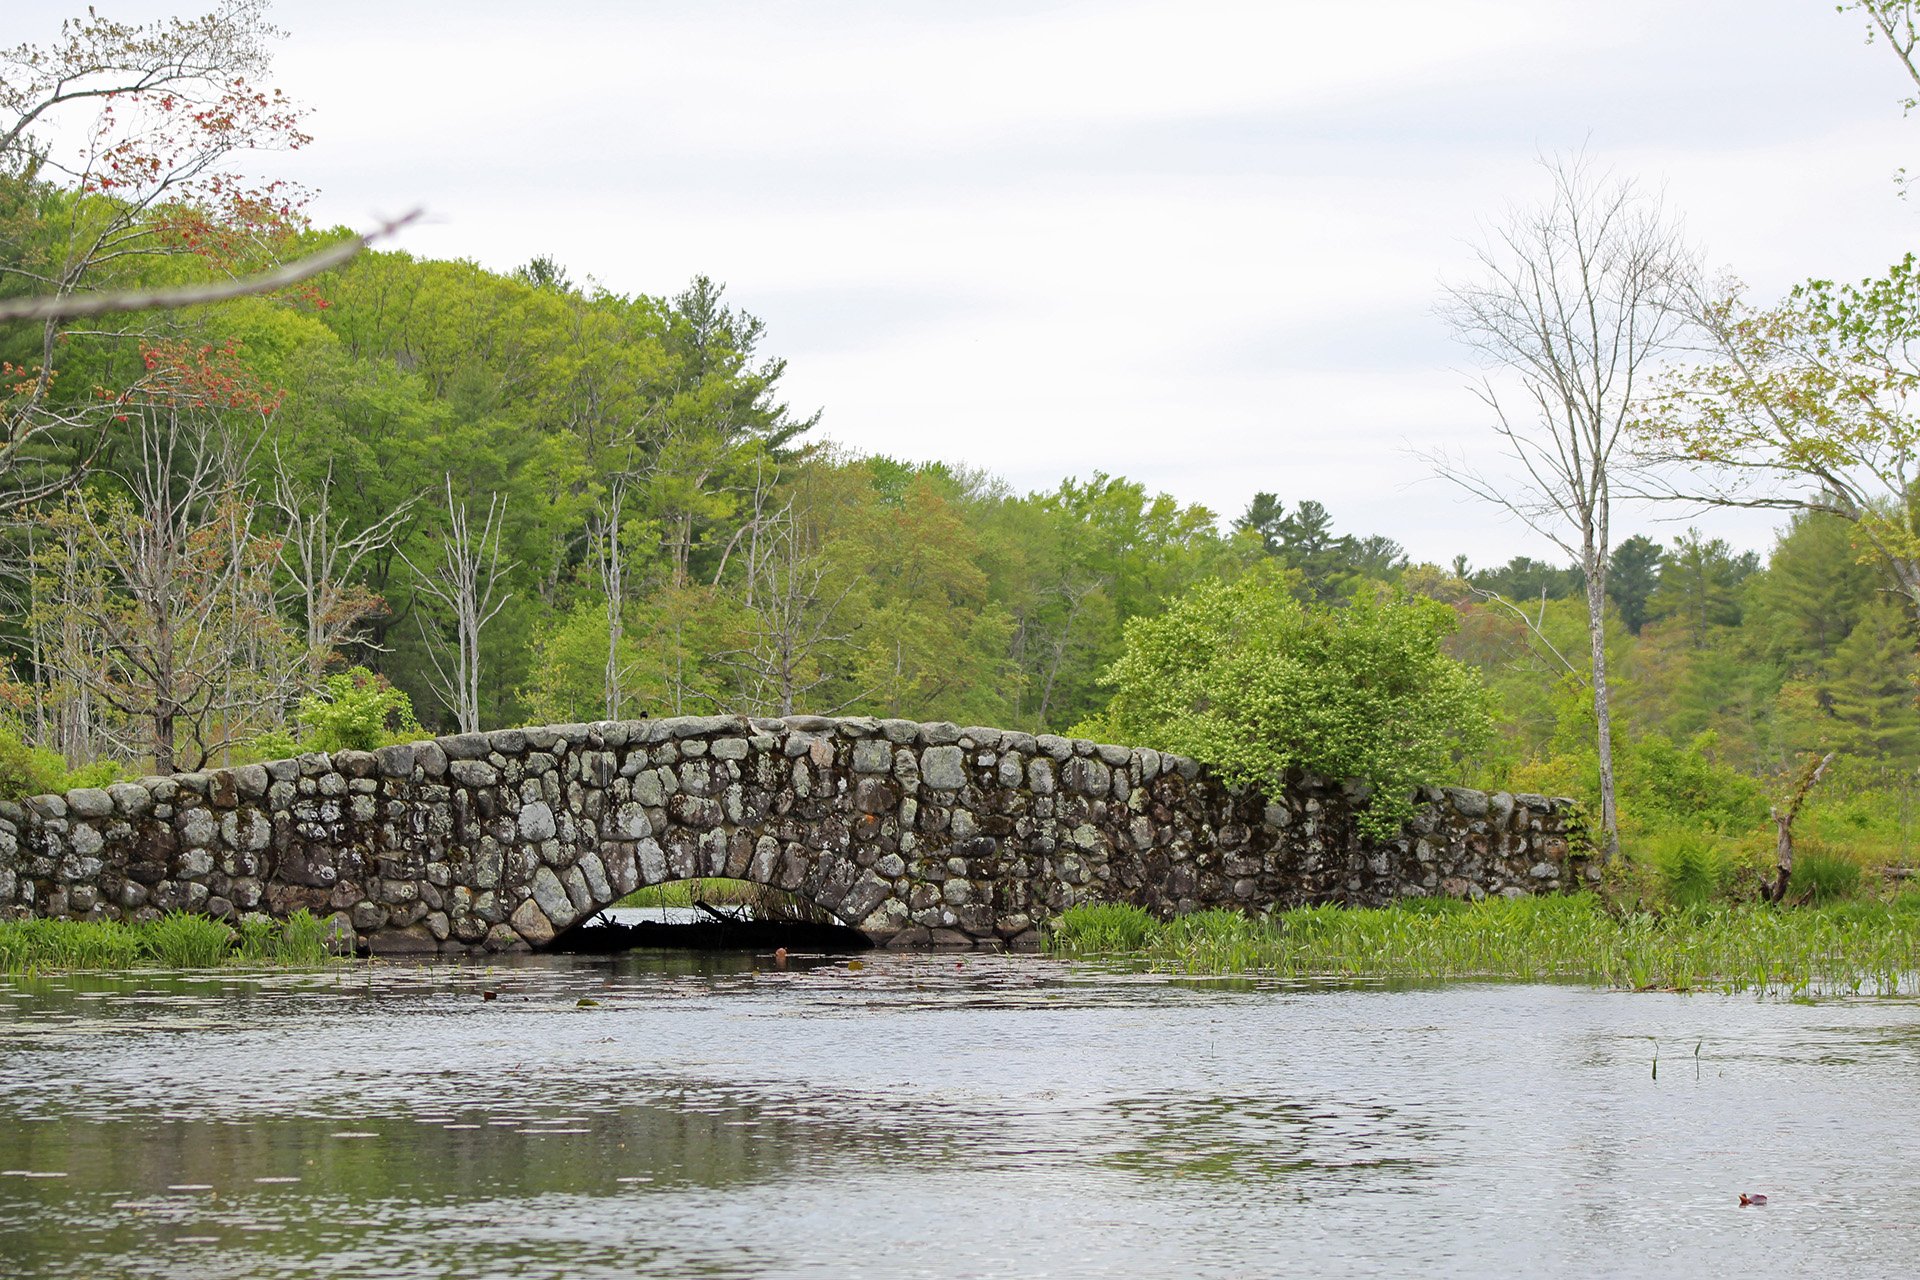 Stone bridge over water with trees in background